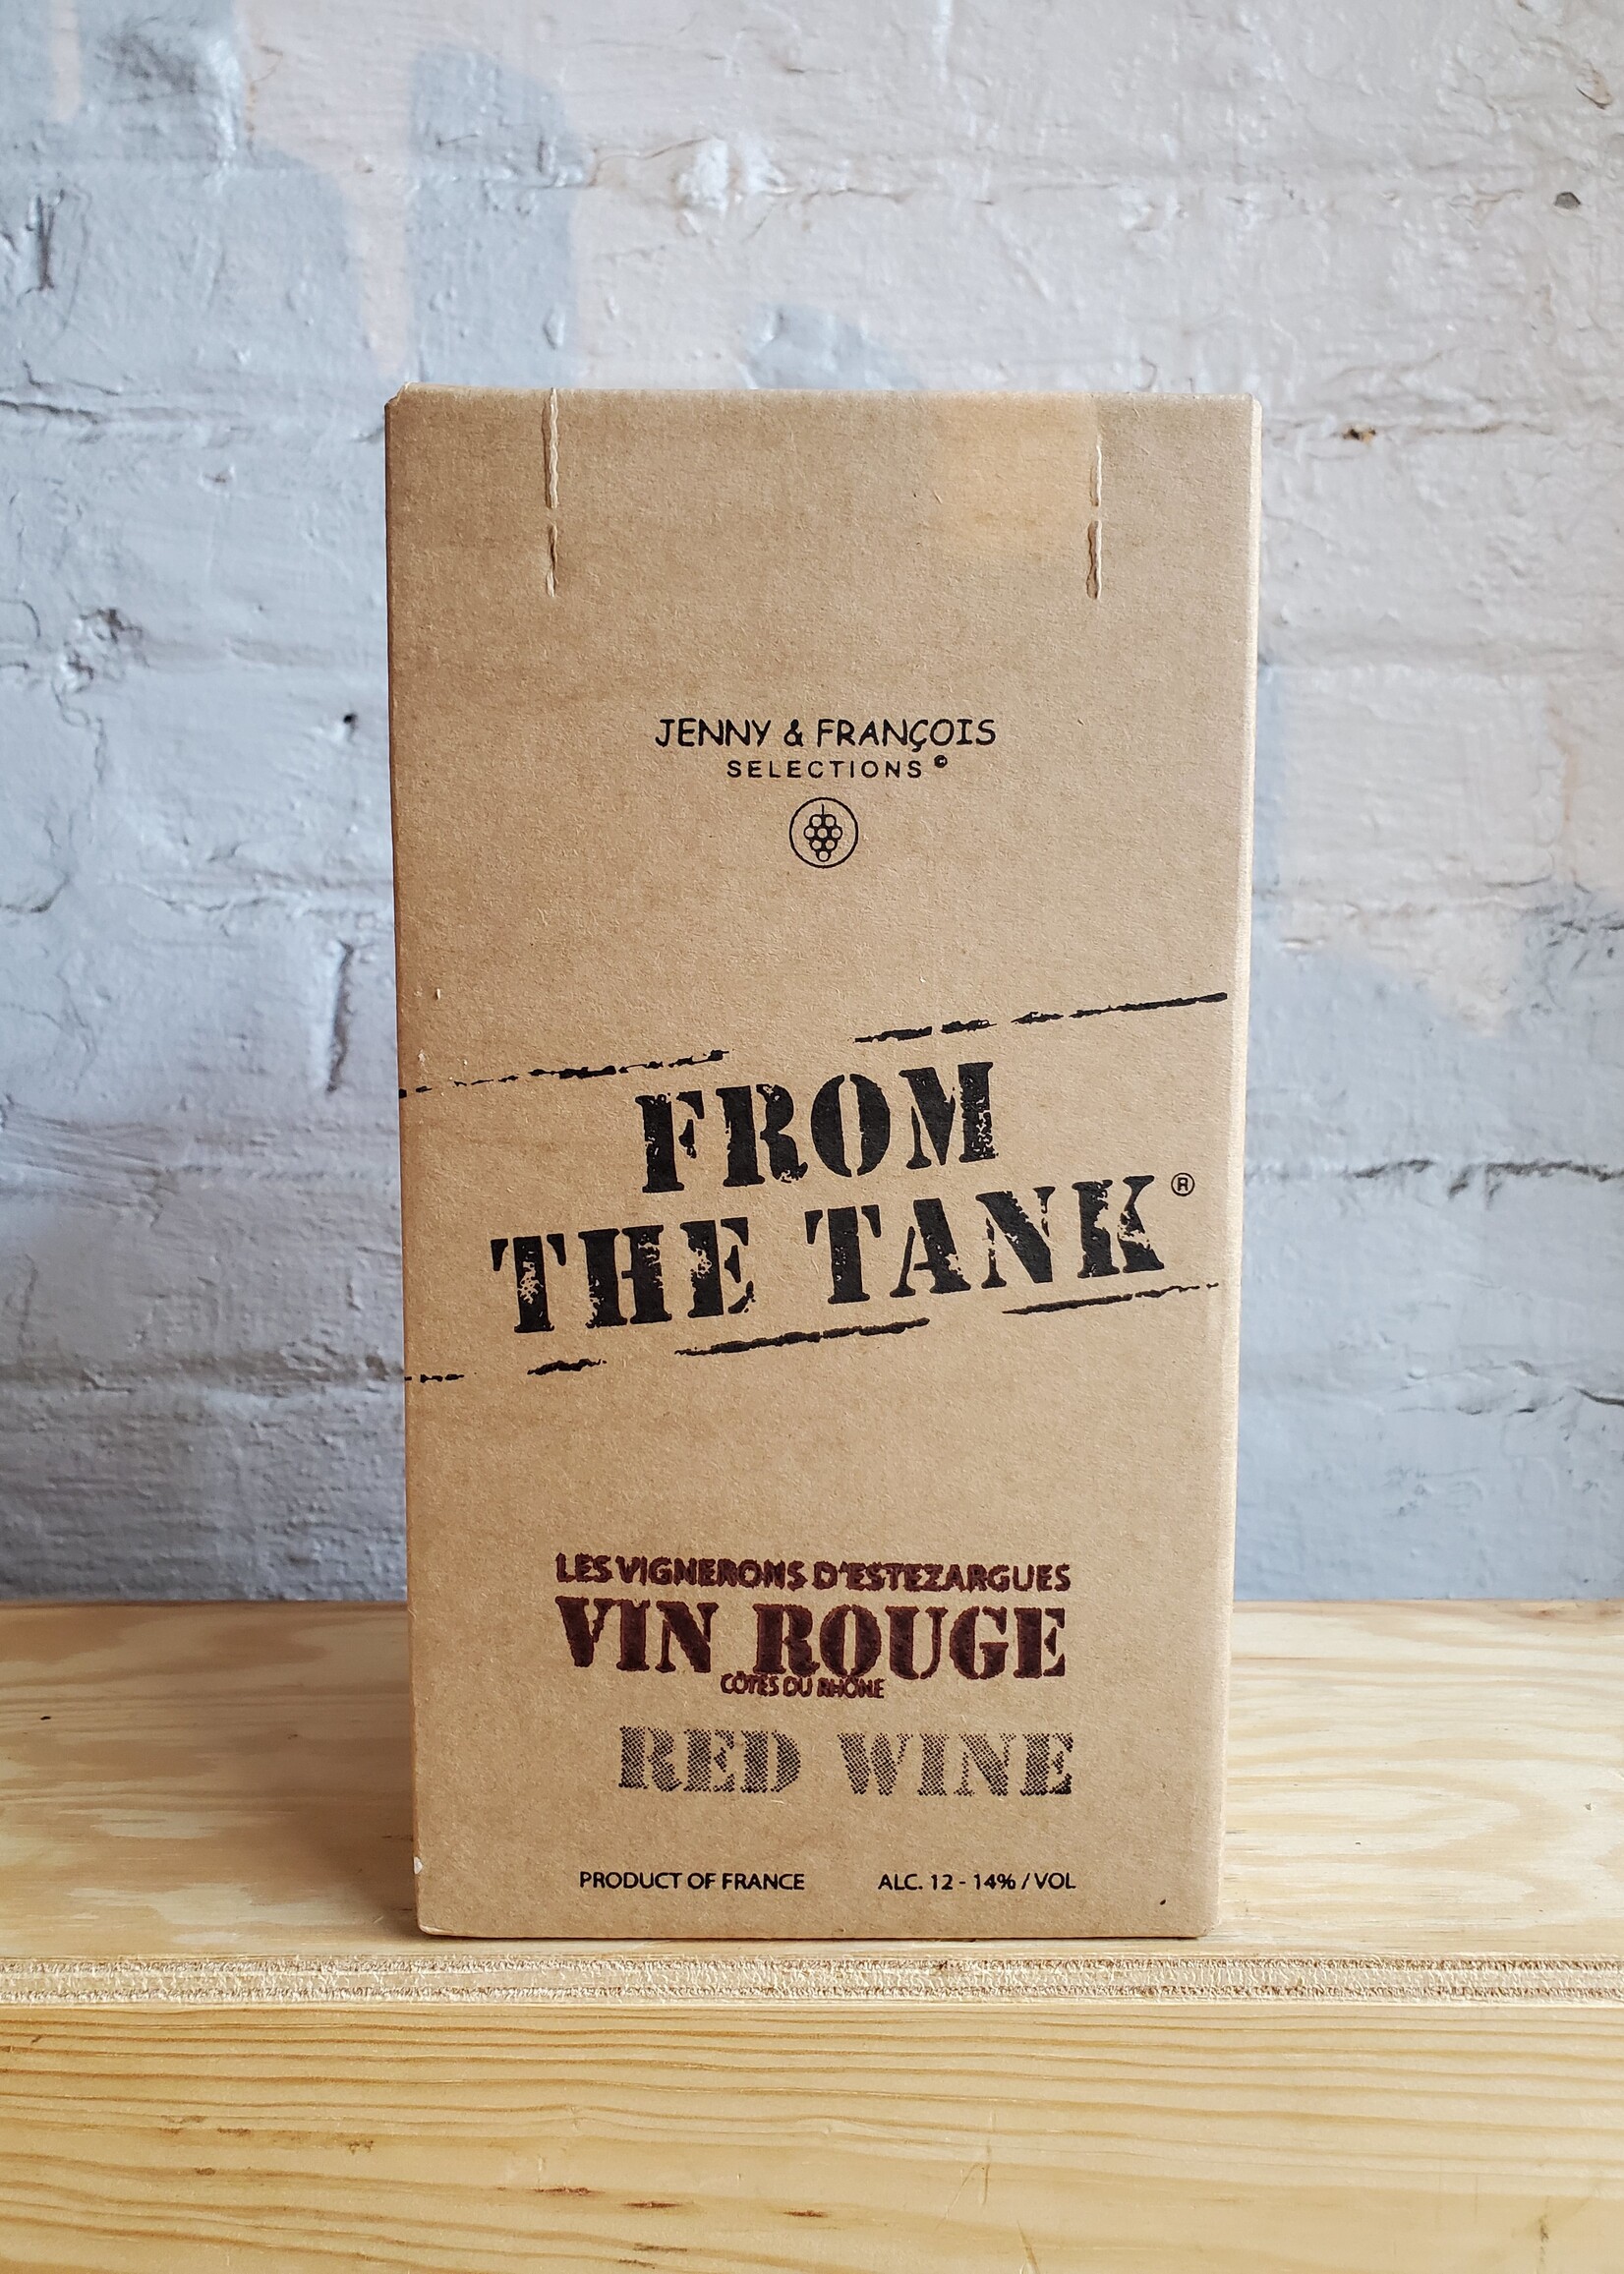 Wine NV Dom de la Patience From the Tank Red - Pont du Gard, Languedoc-Rousillon, France (3L bag-in-box)